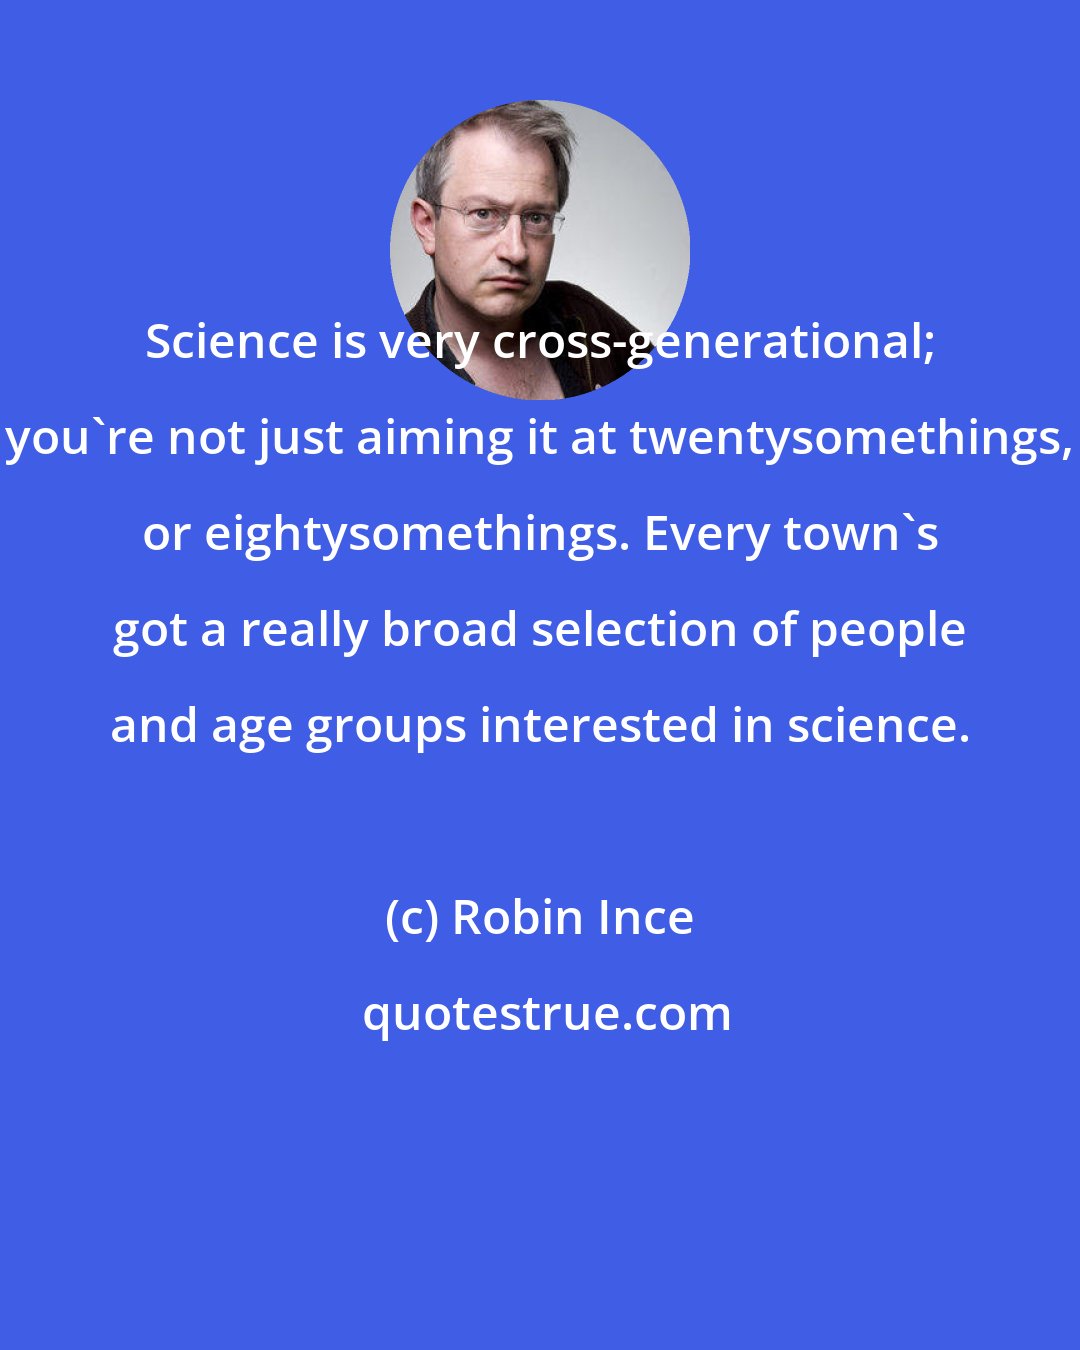 Robin Ince: Science is very cross-generational; you're not just aiming it at twentysomethings, or eightysomethings. Every town's got a really broad selection of people and age groups interested in science.